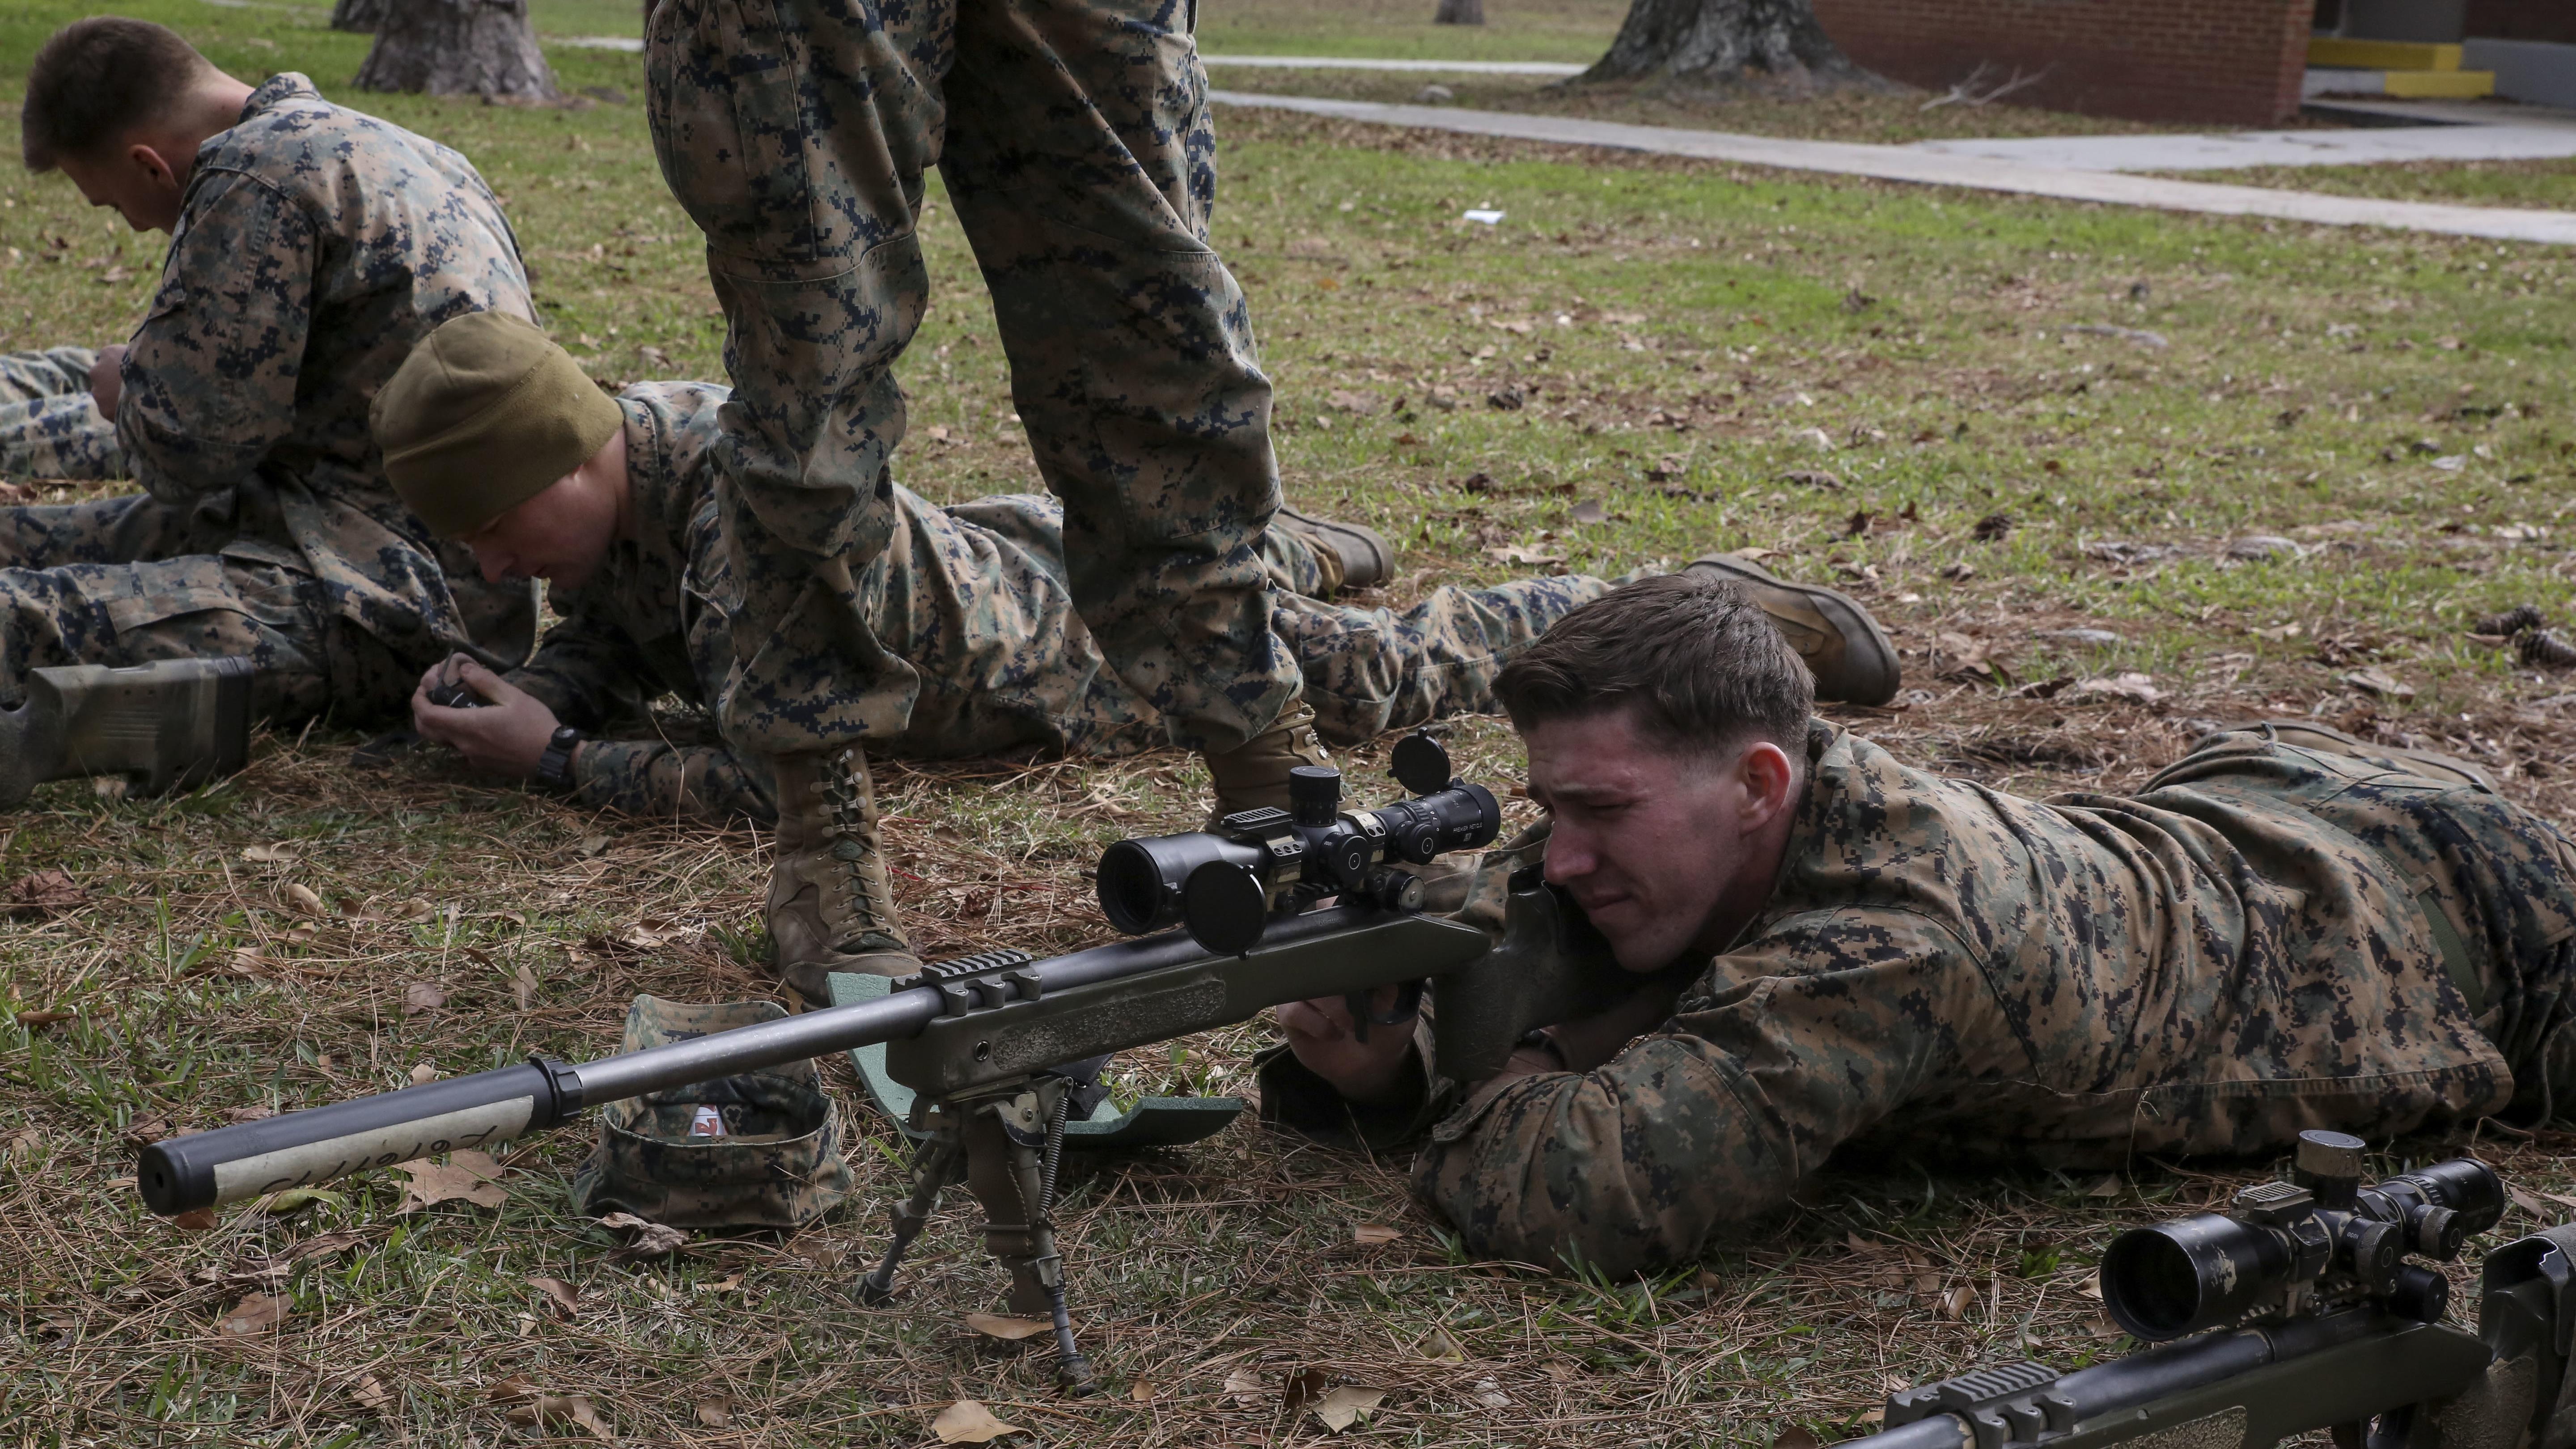 New 'proof of concept' Marine scout sniper course put on hold indefinitely